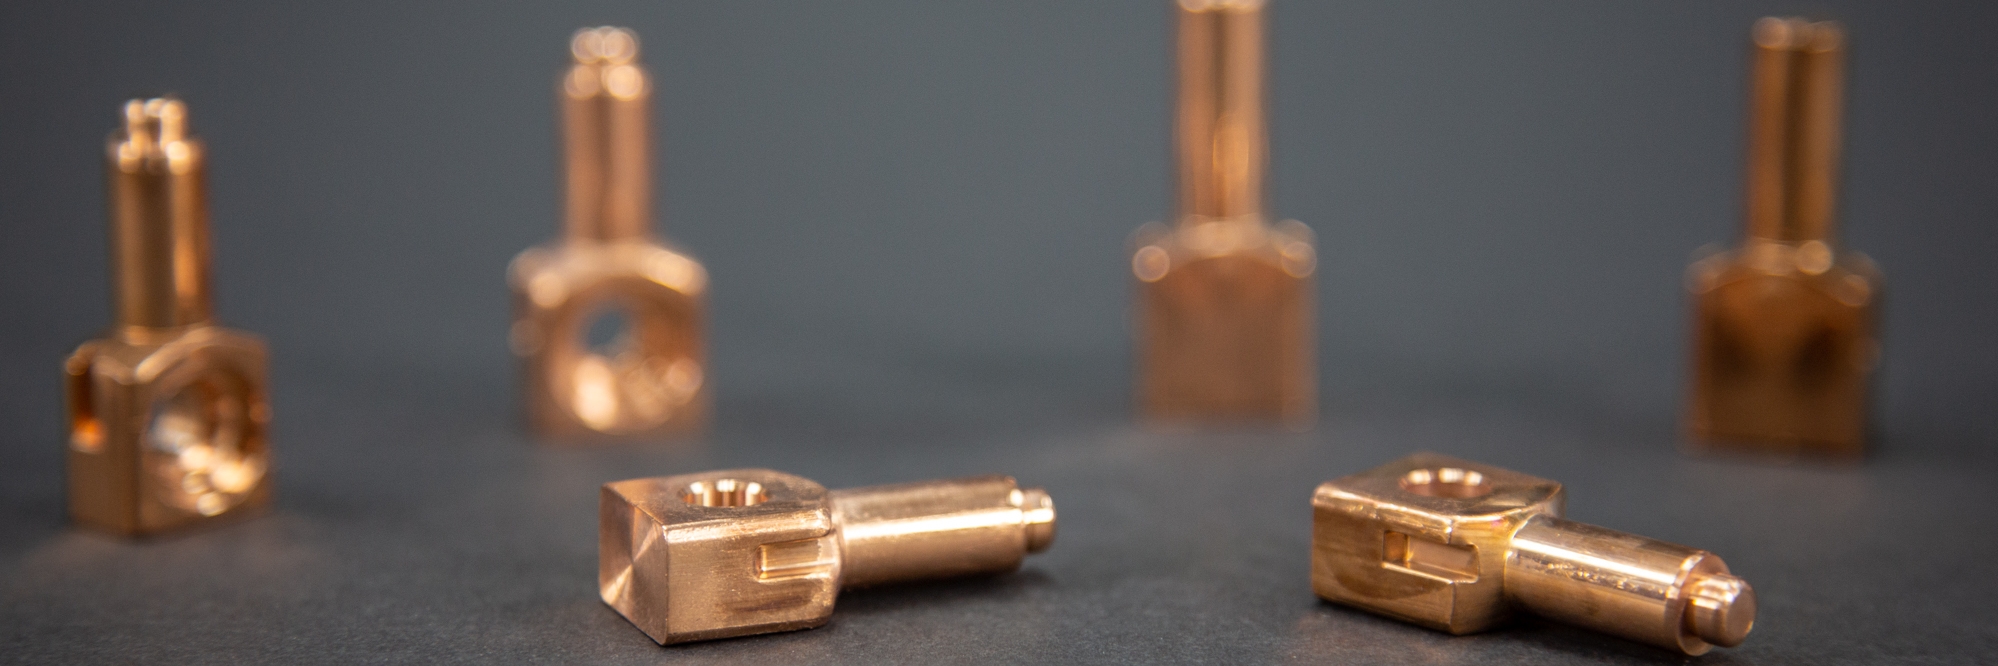 Connector manufacturing using machining processes & cold forming technology